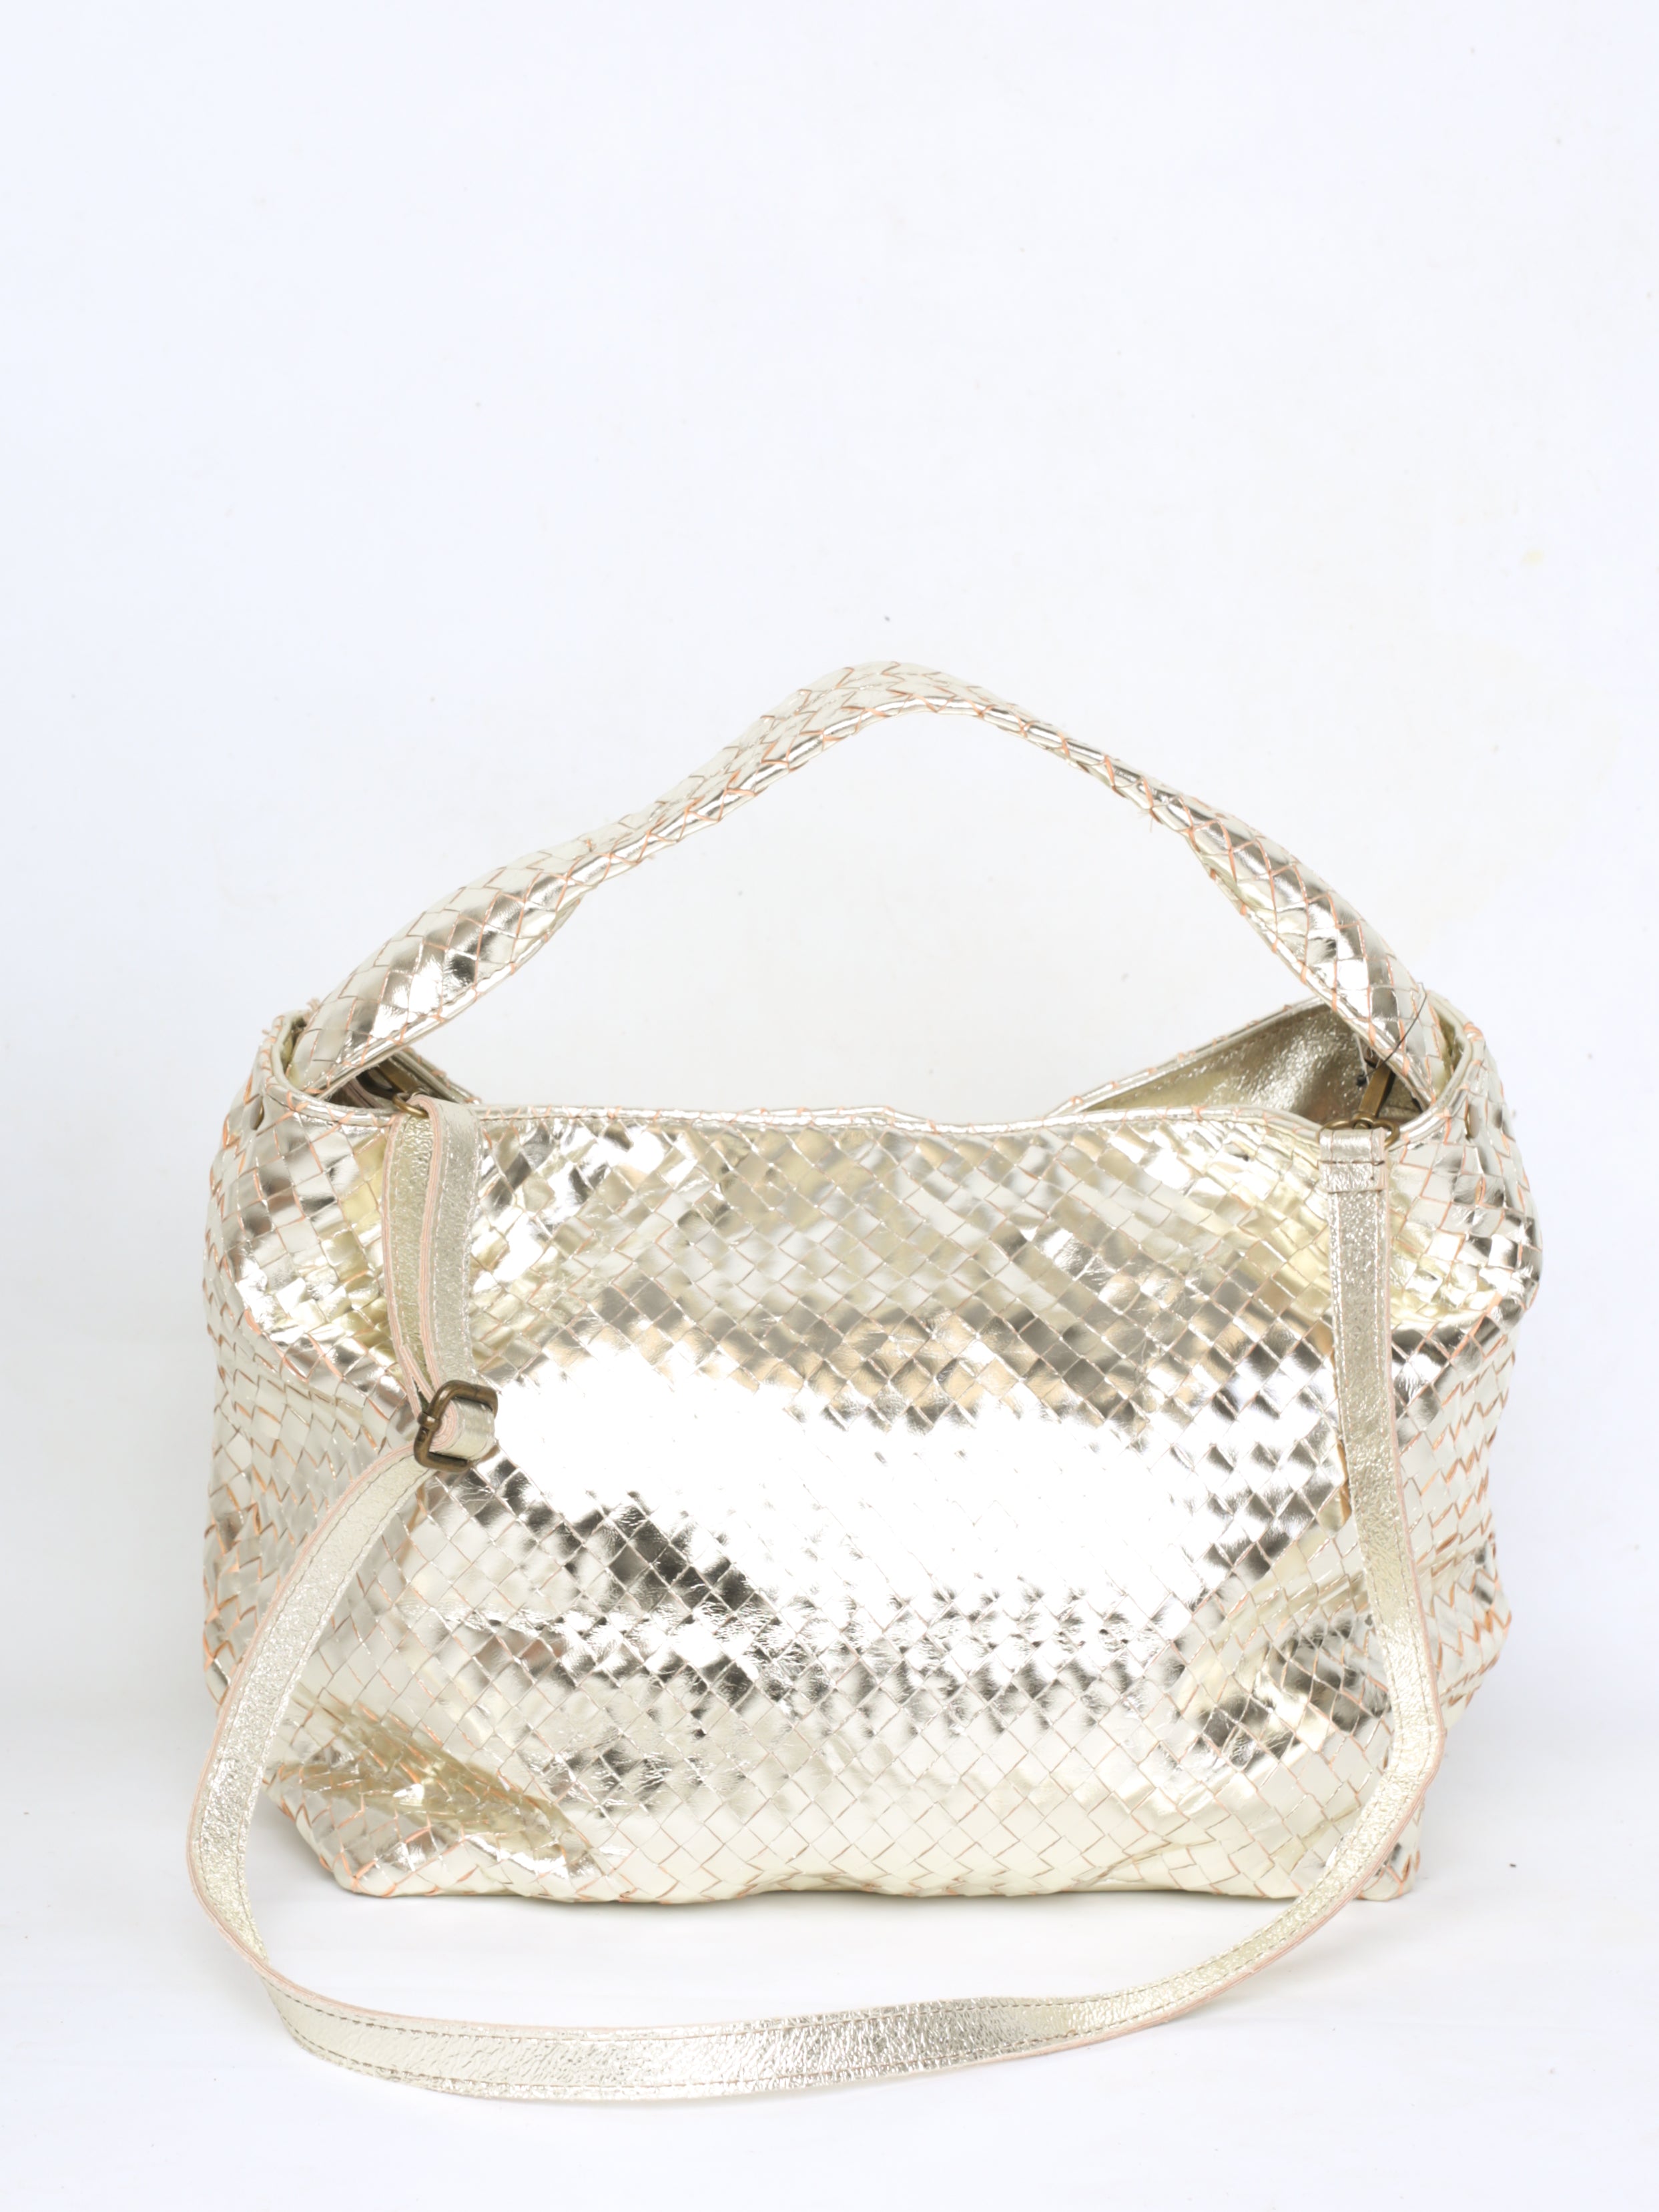 Braided leather bag gold